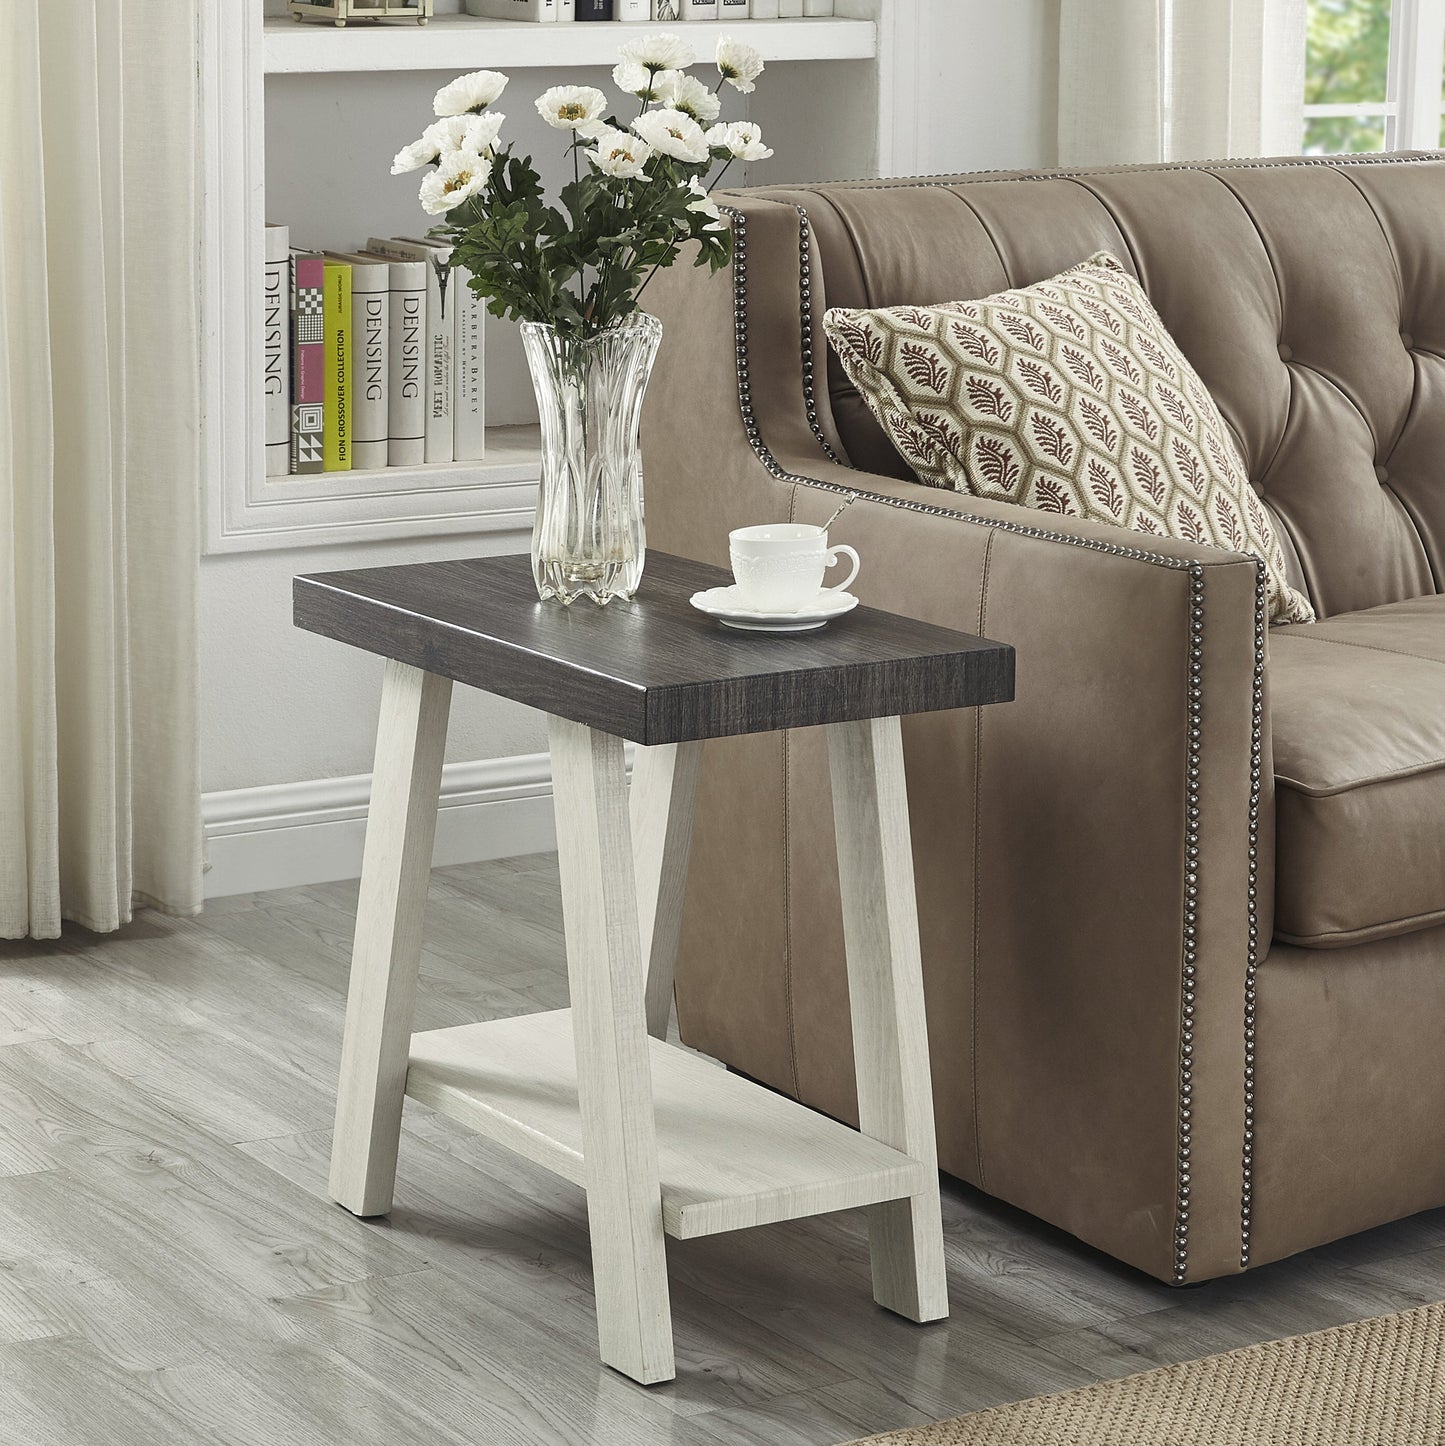 Athens Contemporary Two-Tone Wood Shelf Side Table in Weathered Charcoal and Beige